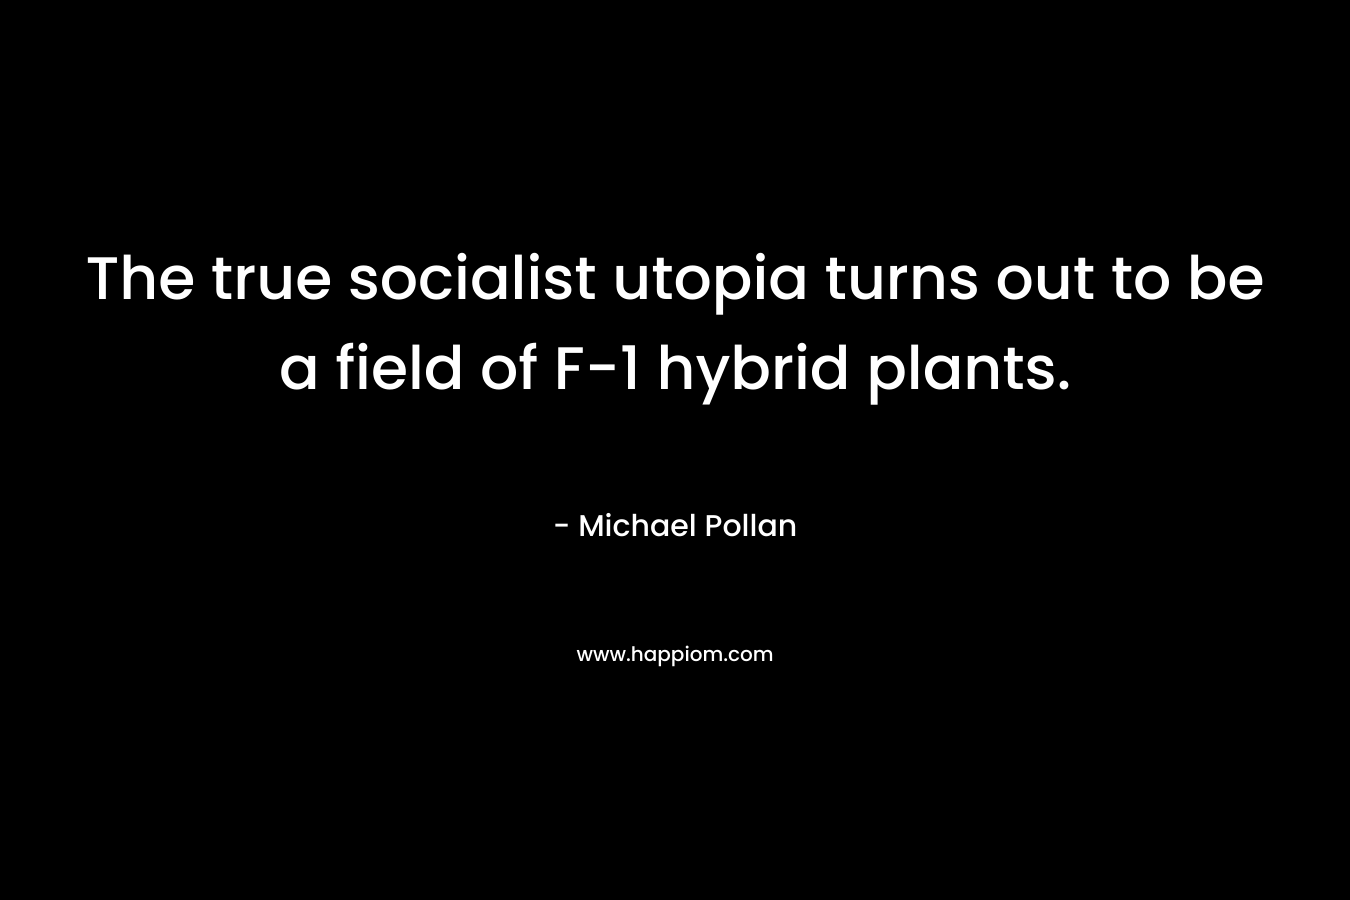 The true socialist utopia turns out to be a field of F-1 hybrid plants.